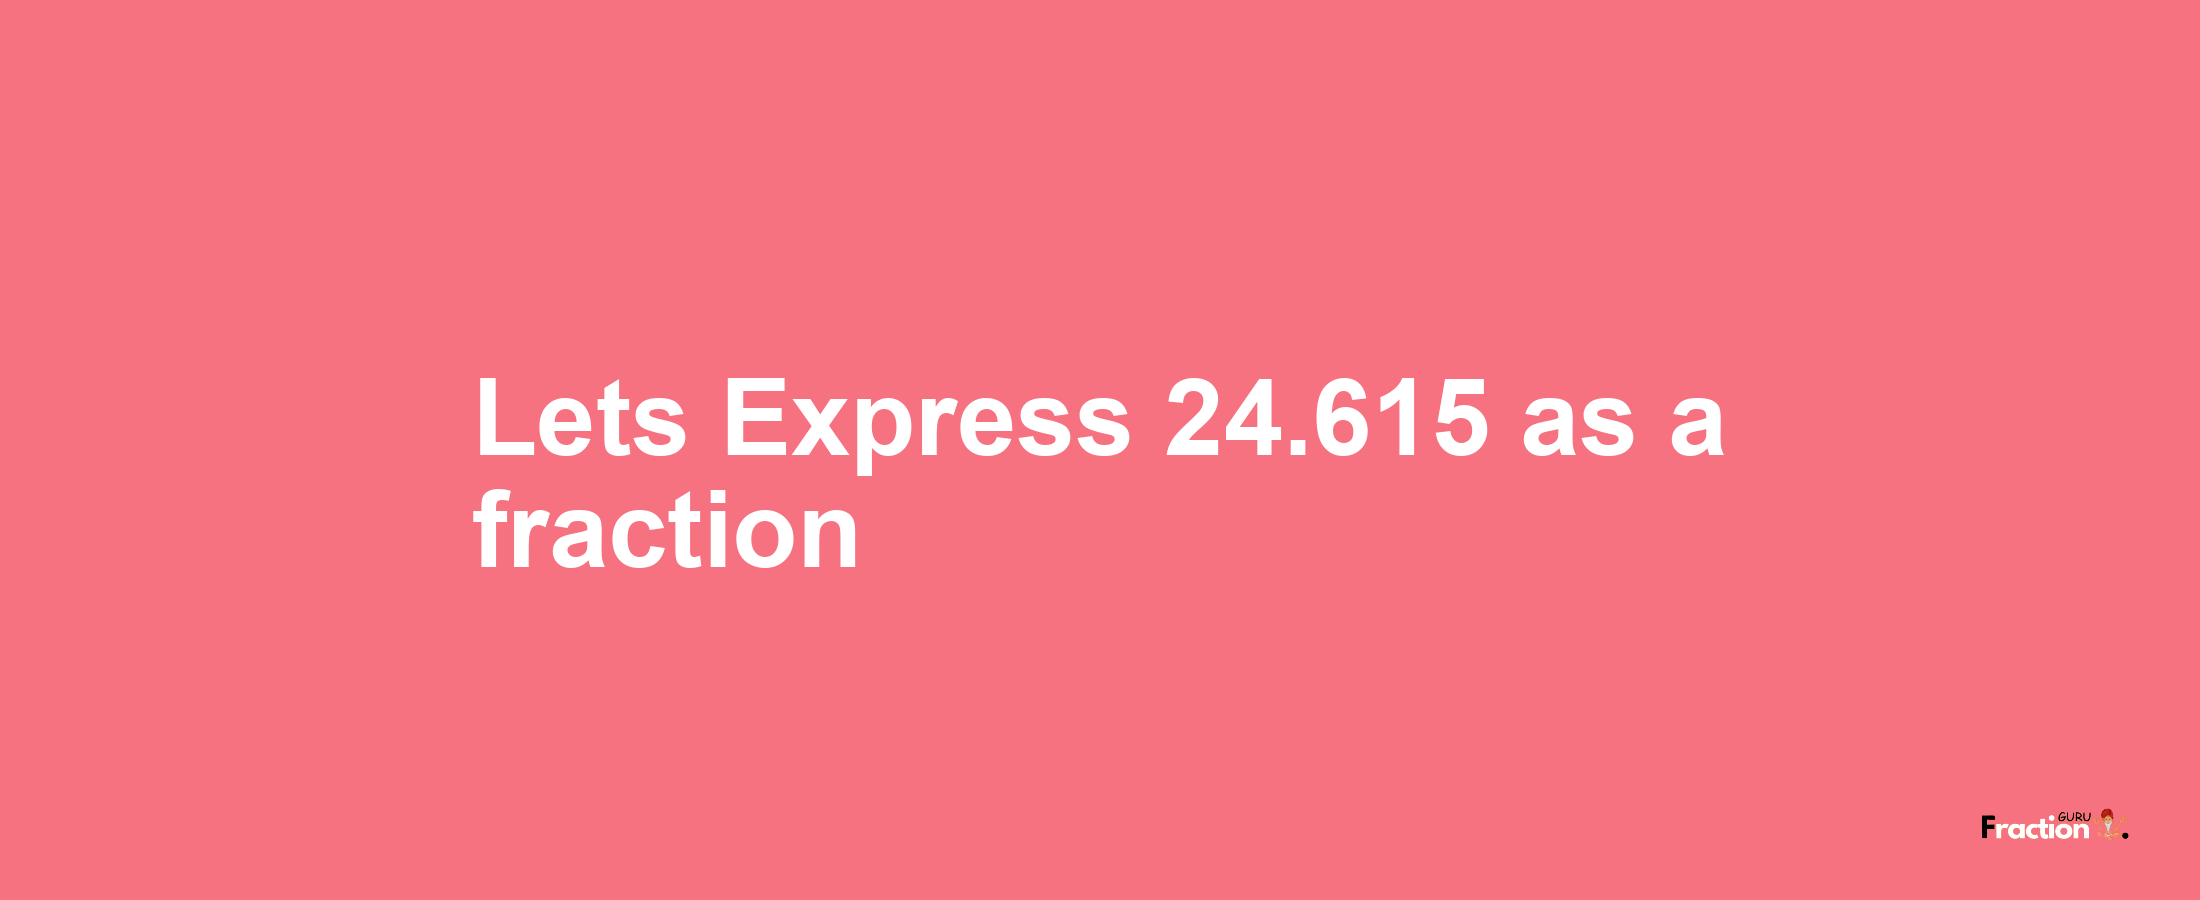 Lets Express 24.615 as afraction